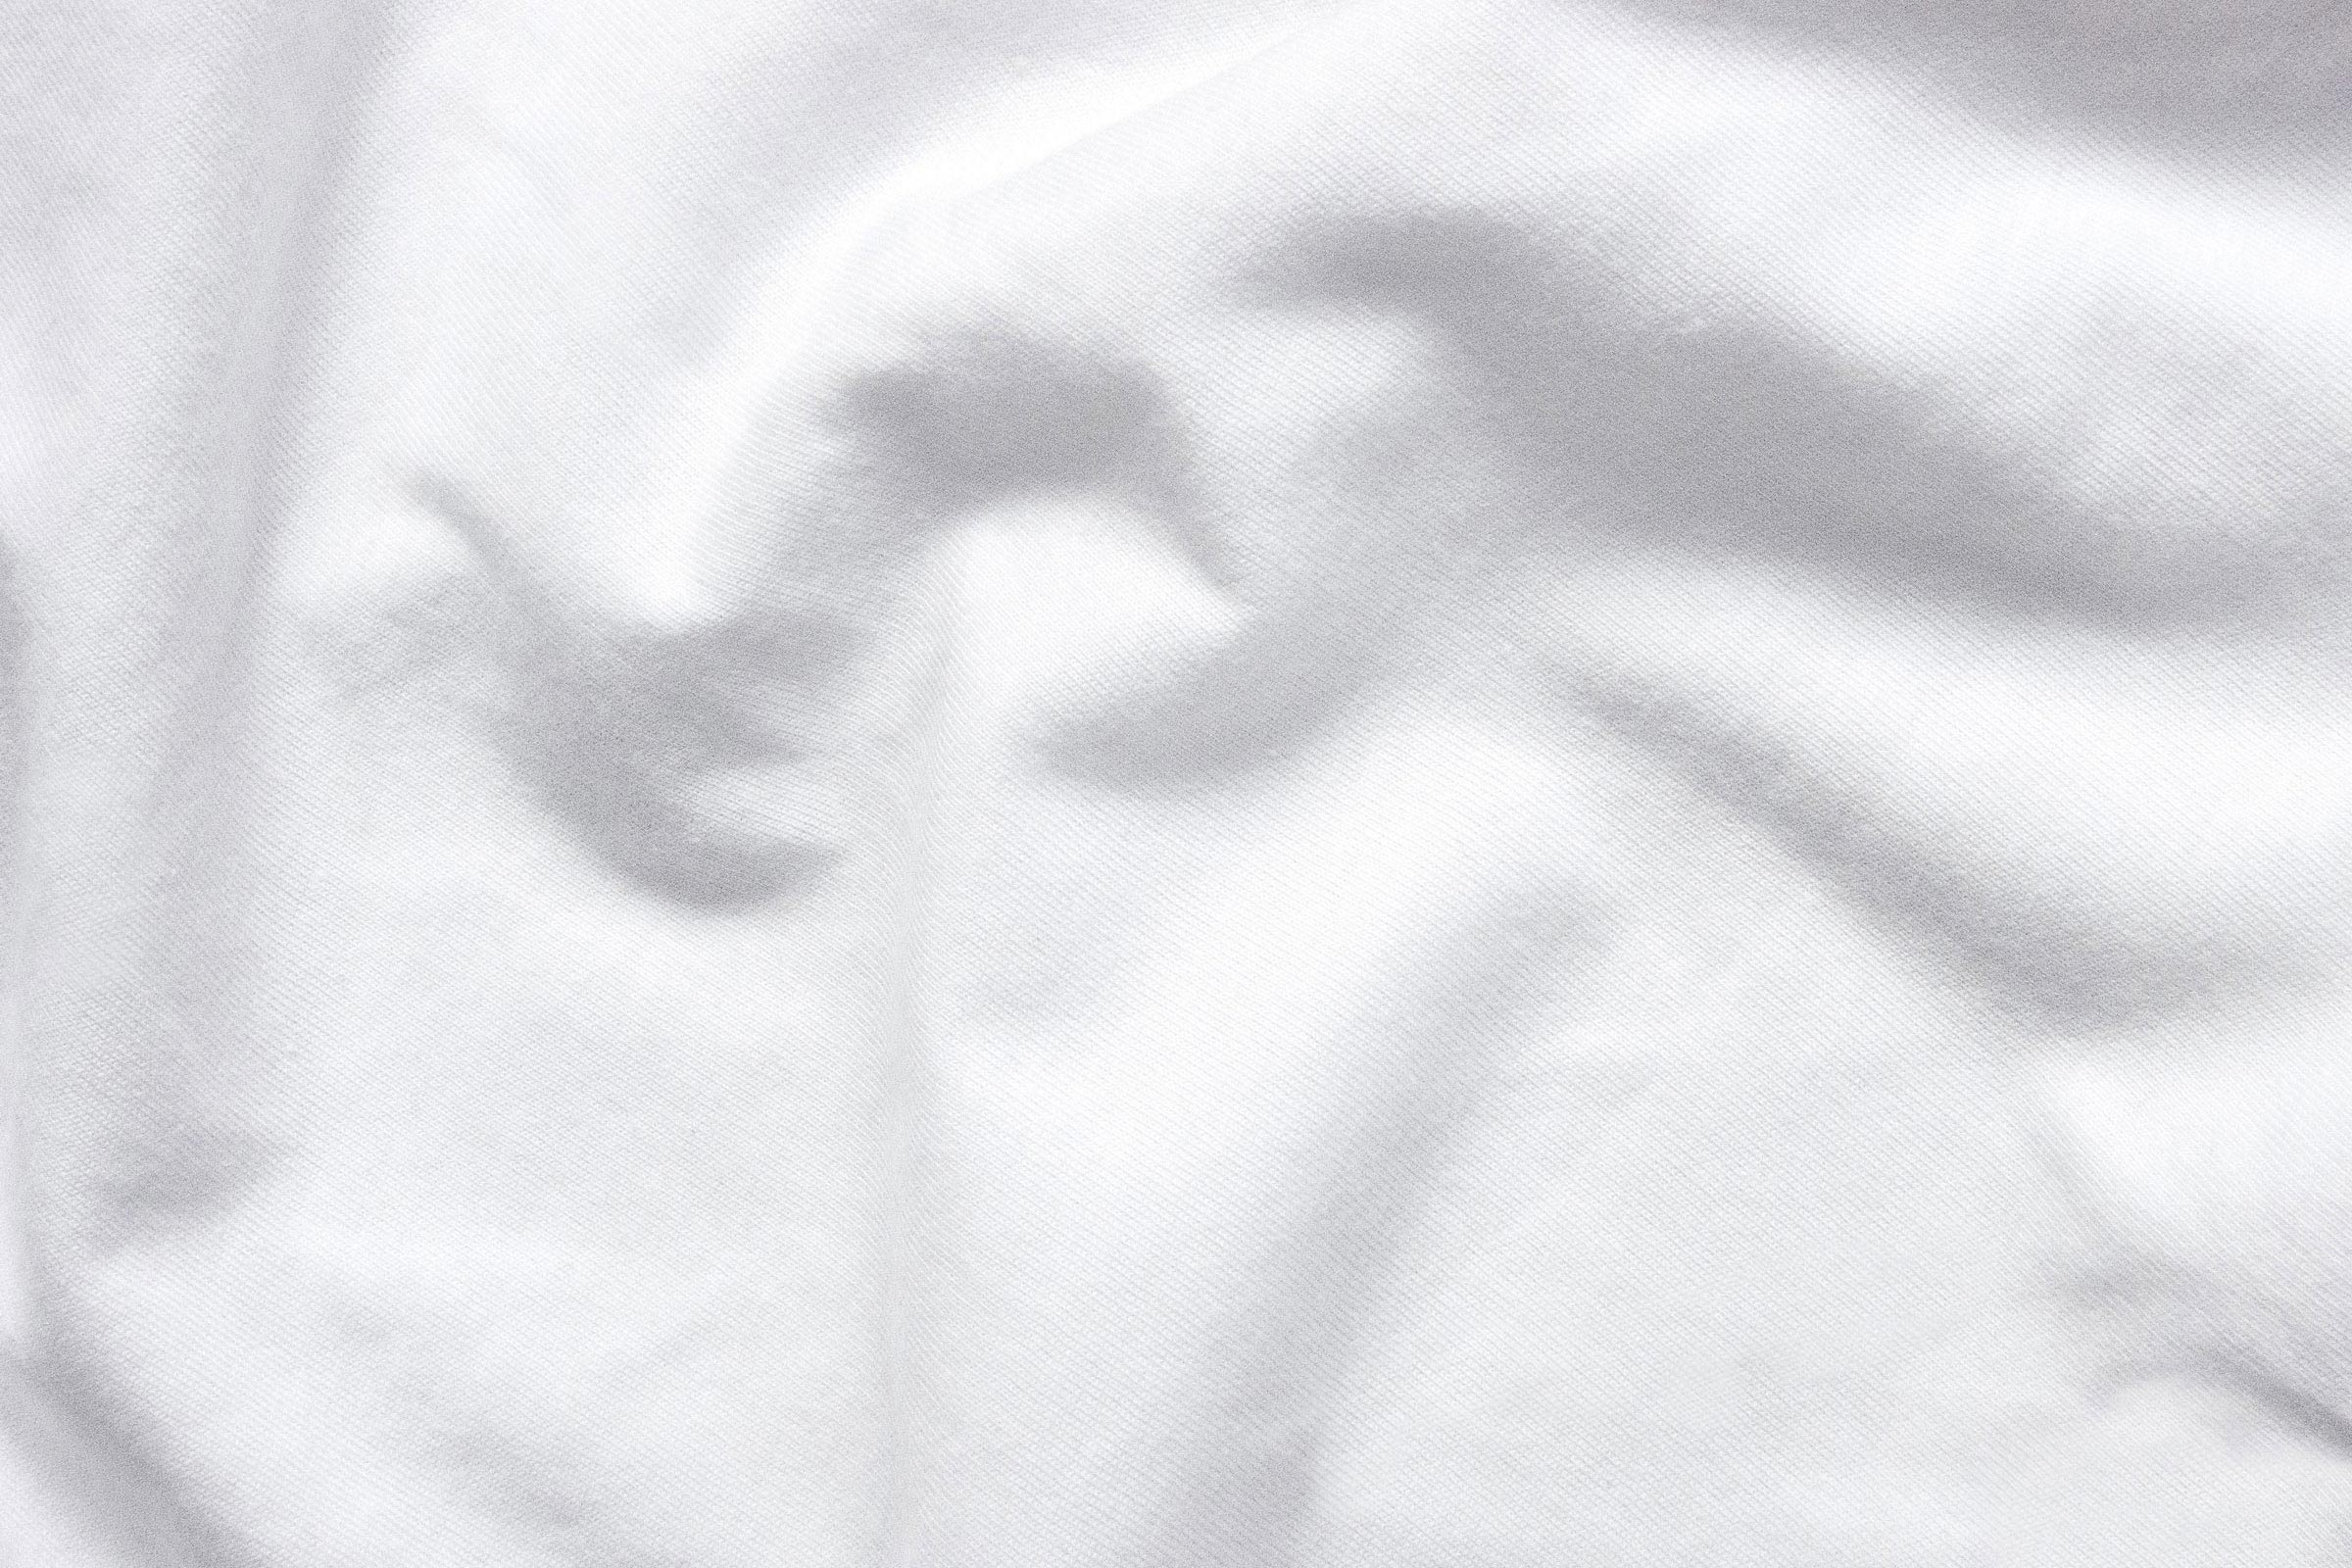 jersey-white-fitted-sheet-close-up-shot-by-sojao.jpg